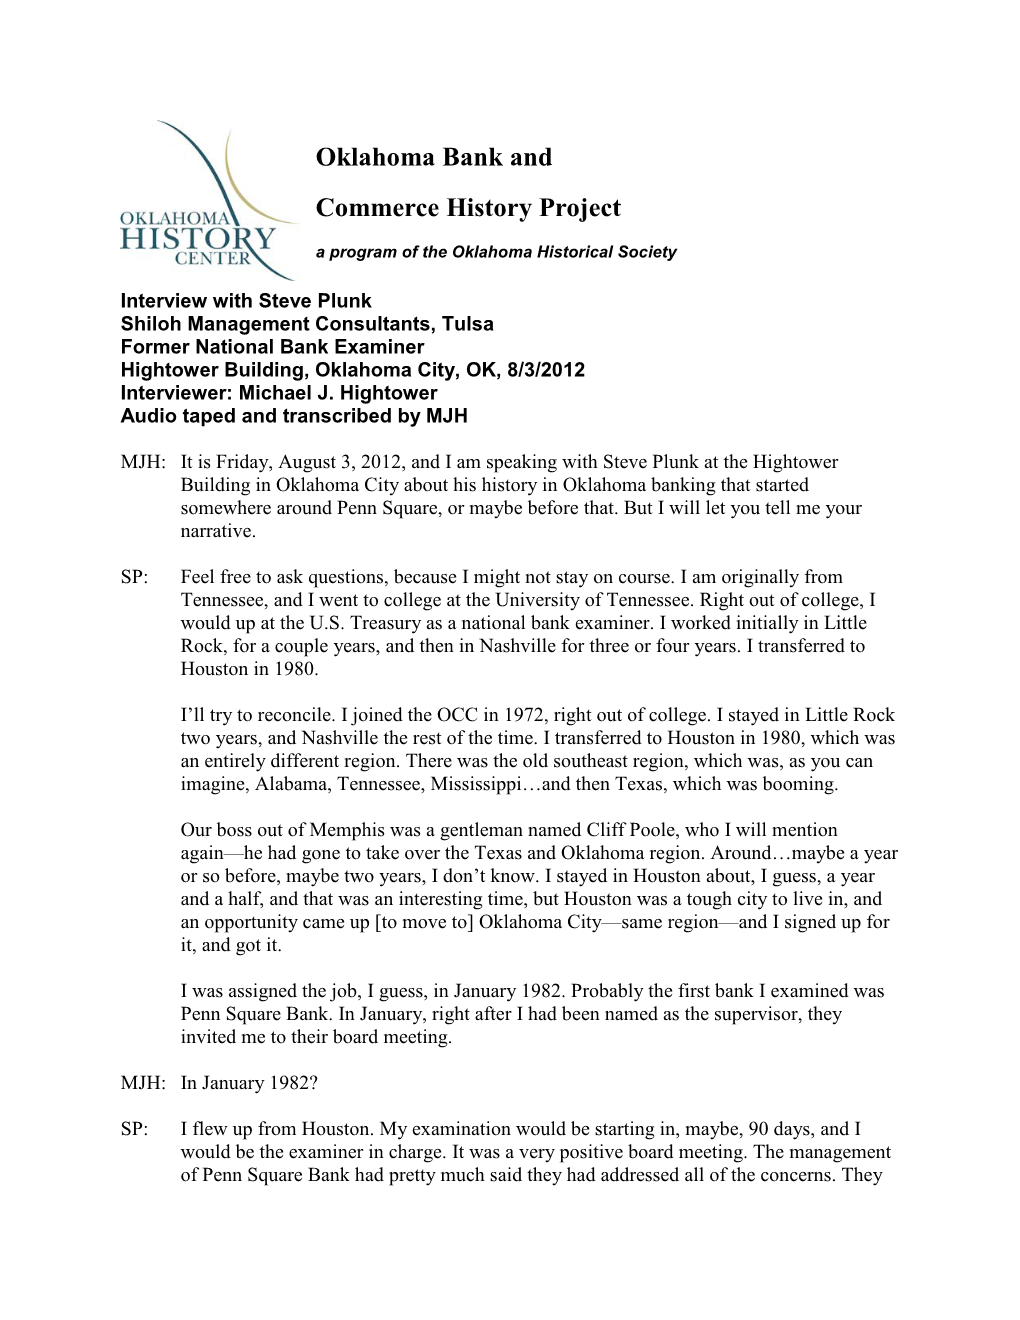 Oklahoma Bank and Commerce History Project